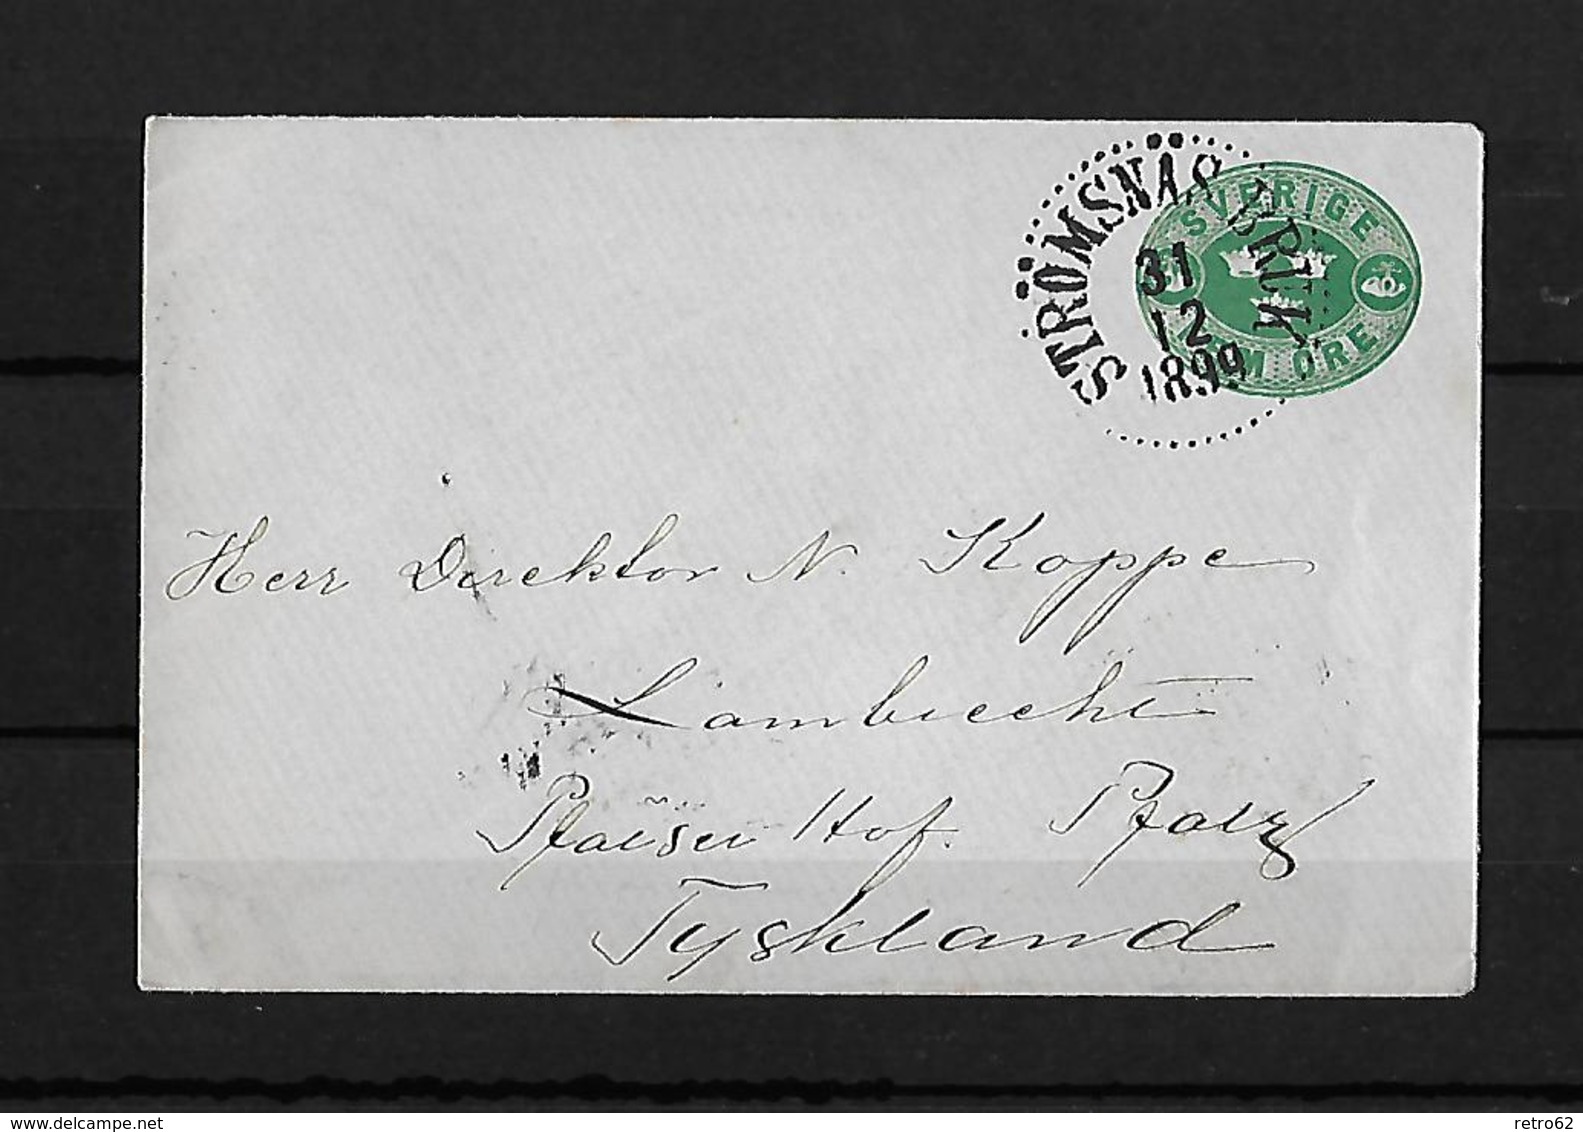 Sweden-1899 → 5 Ore Green Type 1 PS Letter Stromsnasbrik Cover To Germany - Entiers Postaux